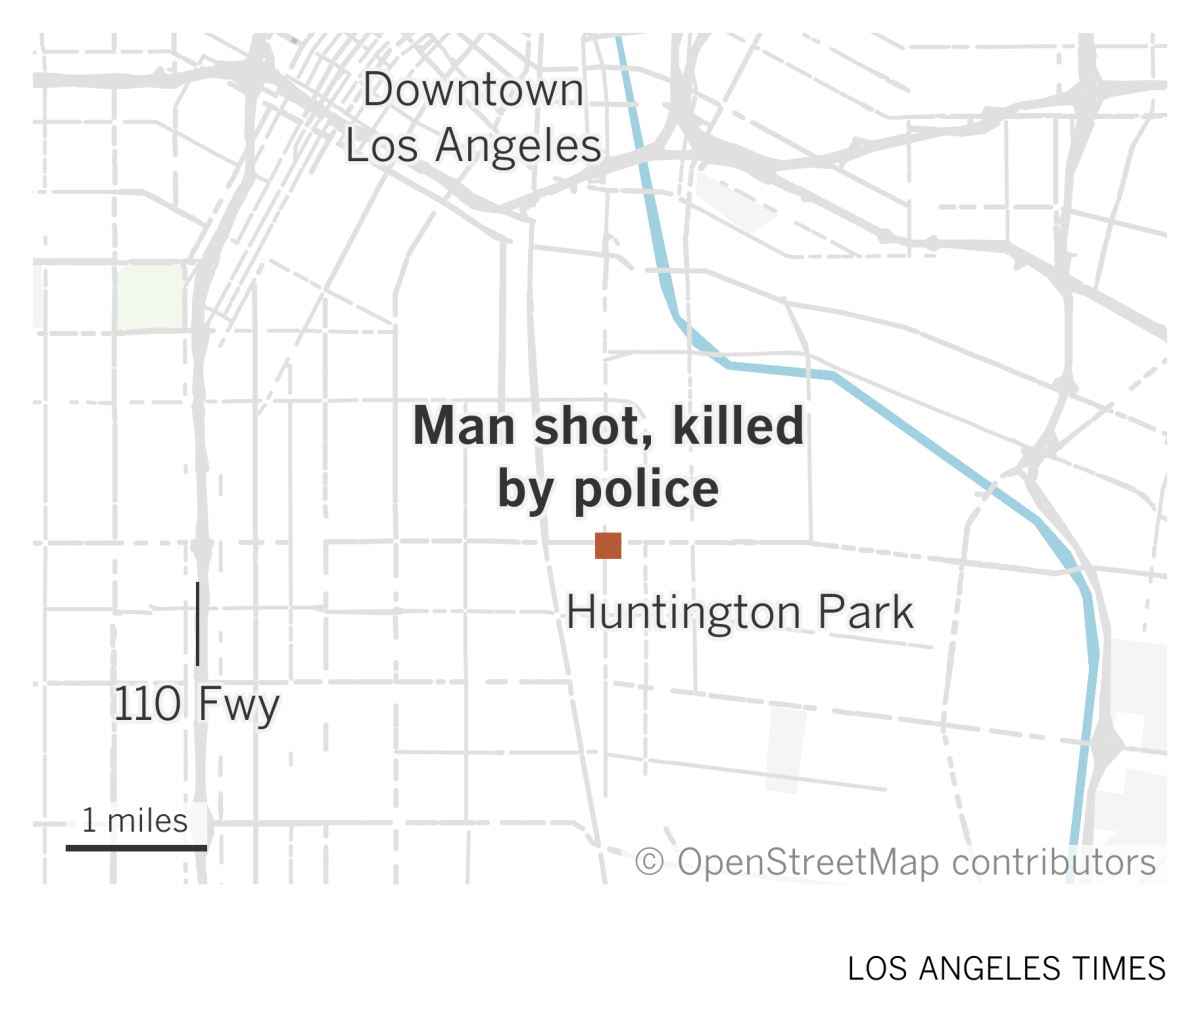 A map of southeast Los Angeles shows where a man was shot and killed by police